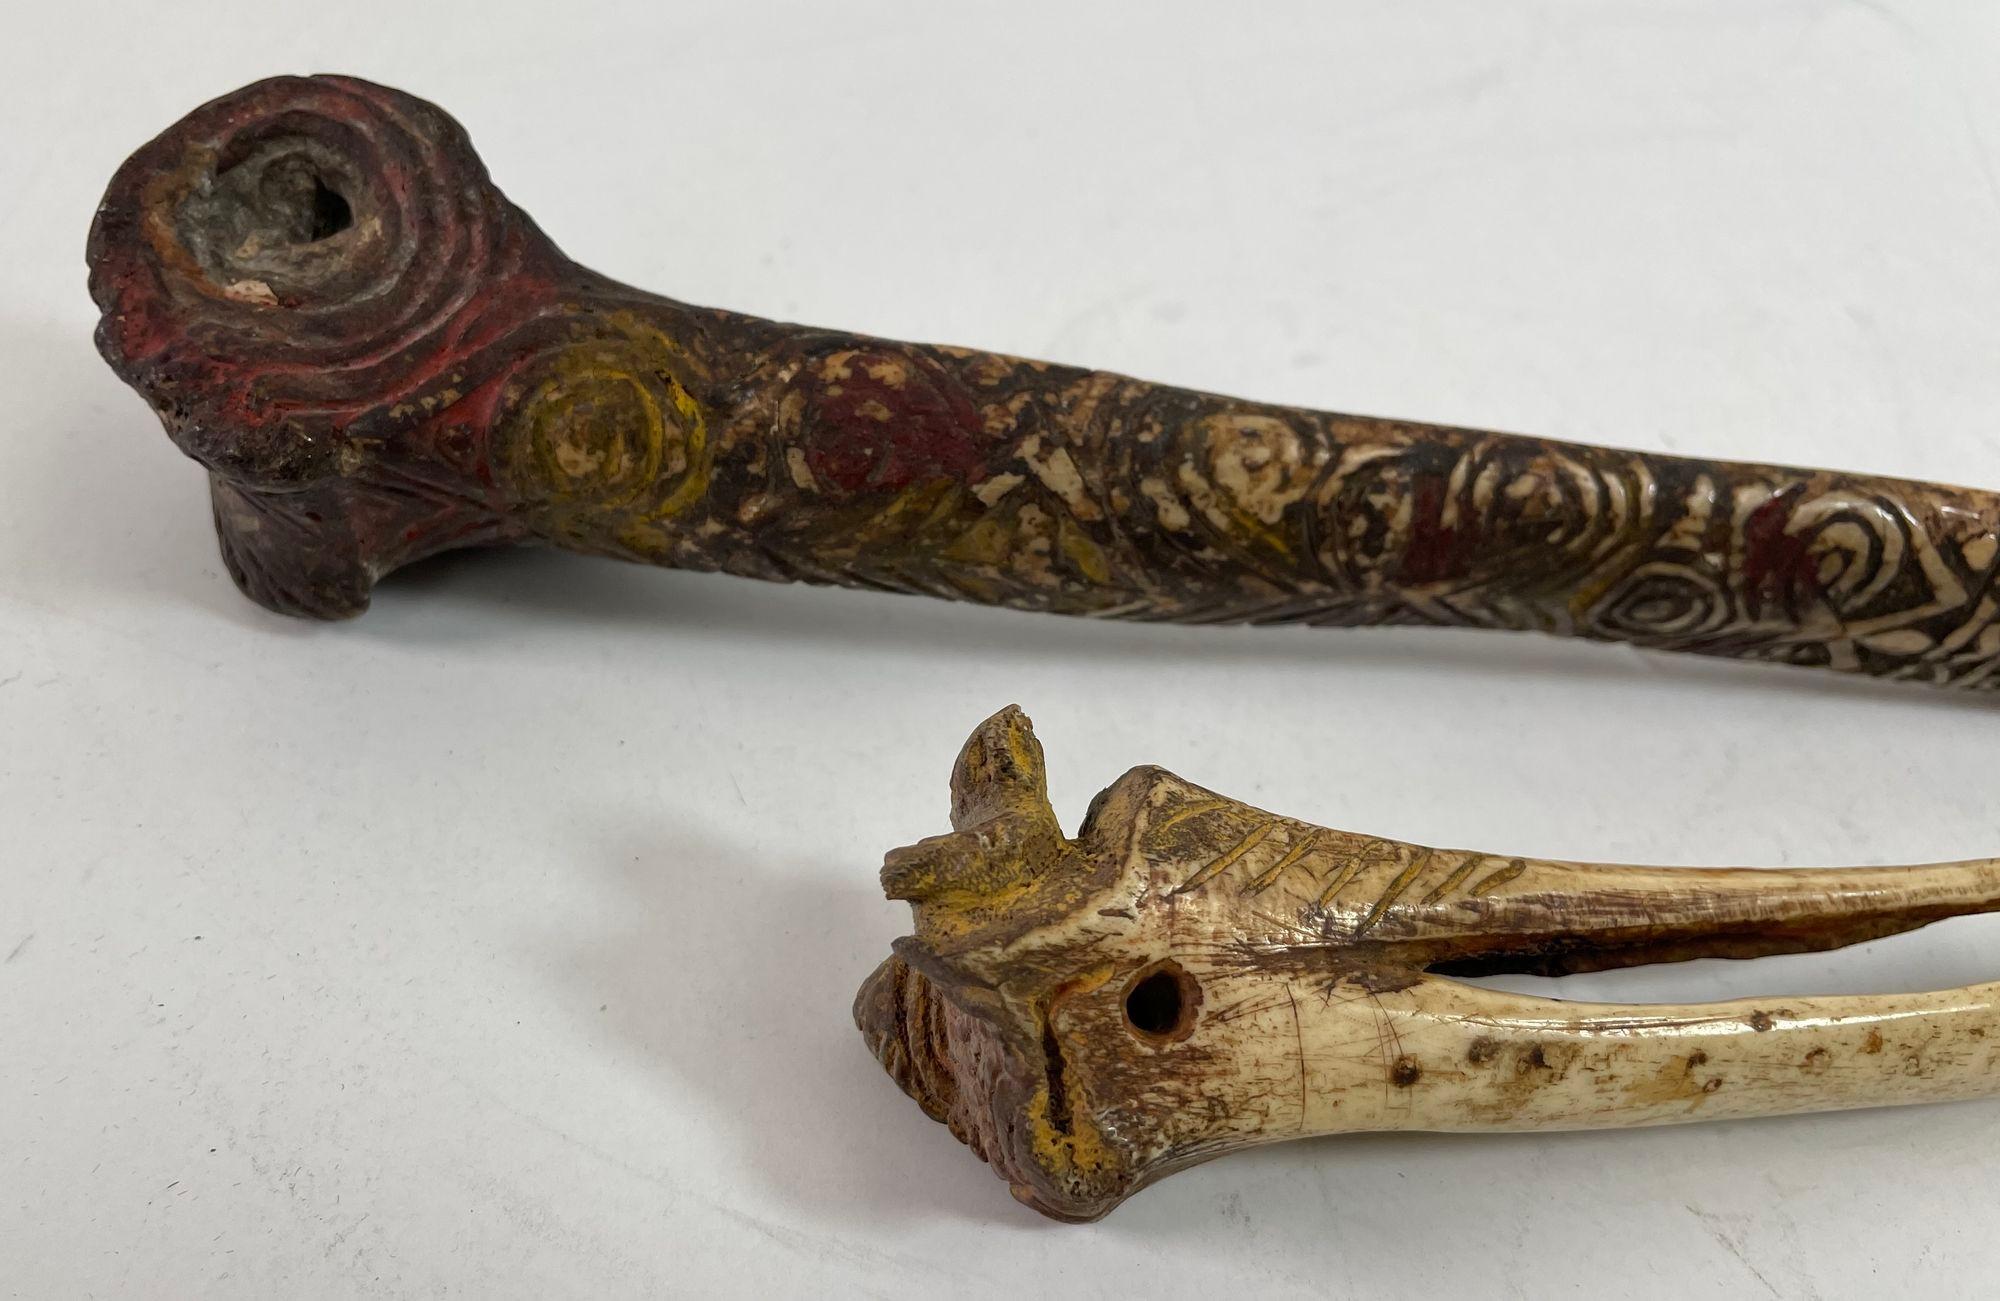 Antique Ethnic Artifact Sepik River Cassowary Bone from Papua New Guinea
For many groups in Papua New Guinea, bone was an important medium for making tools of all types. This artifact is made from leg bone of a cassowary, a large, flightless, and